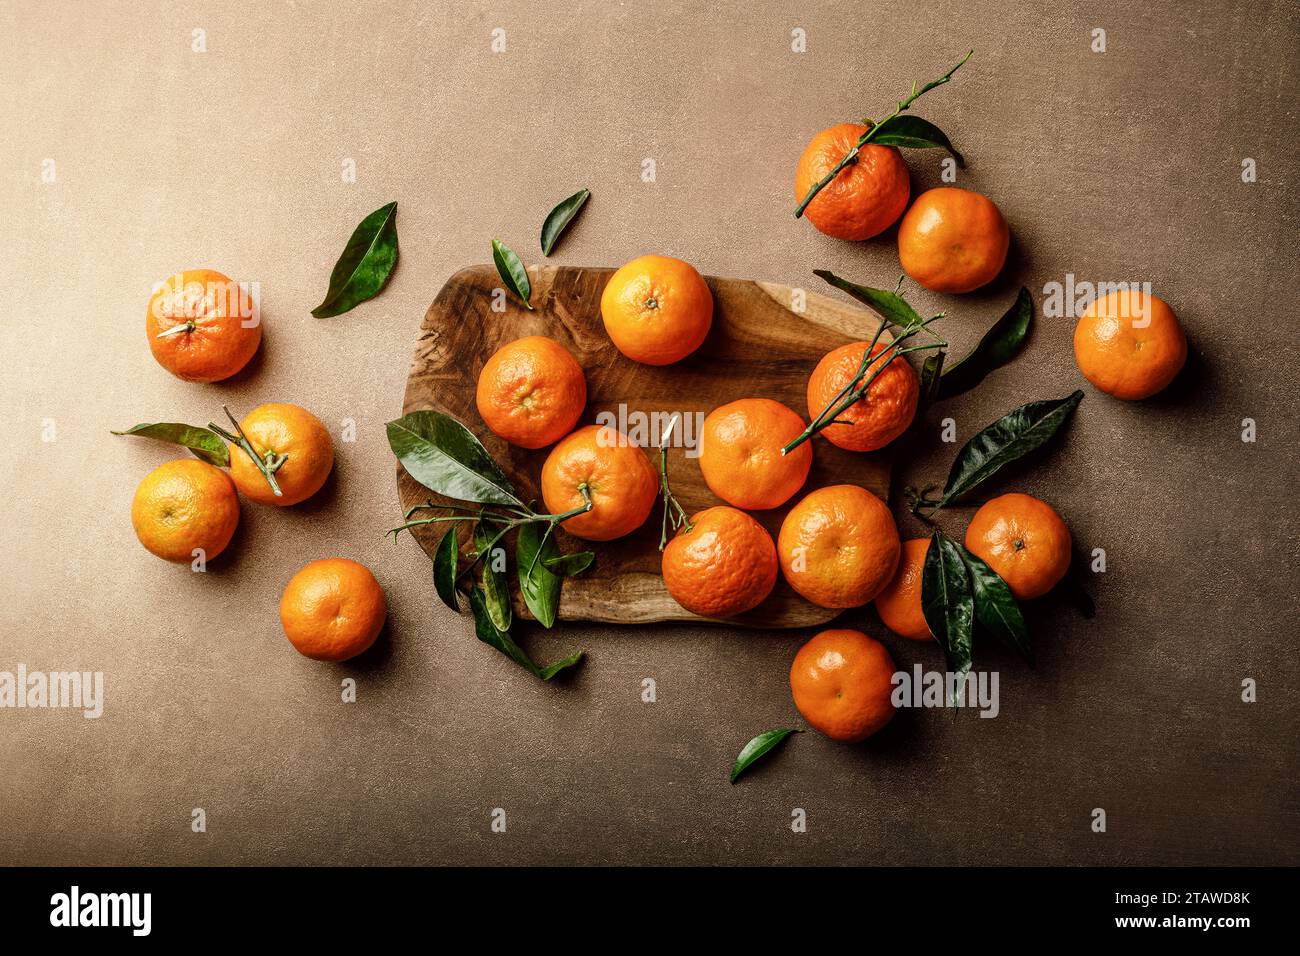 Mandarin oranges, clementines or tangerines with leaves on a dark background, top view Stock Photo